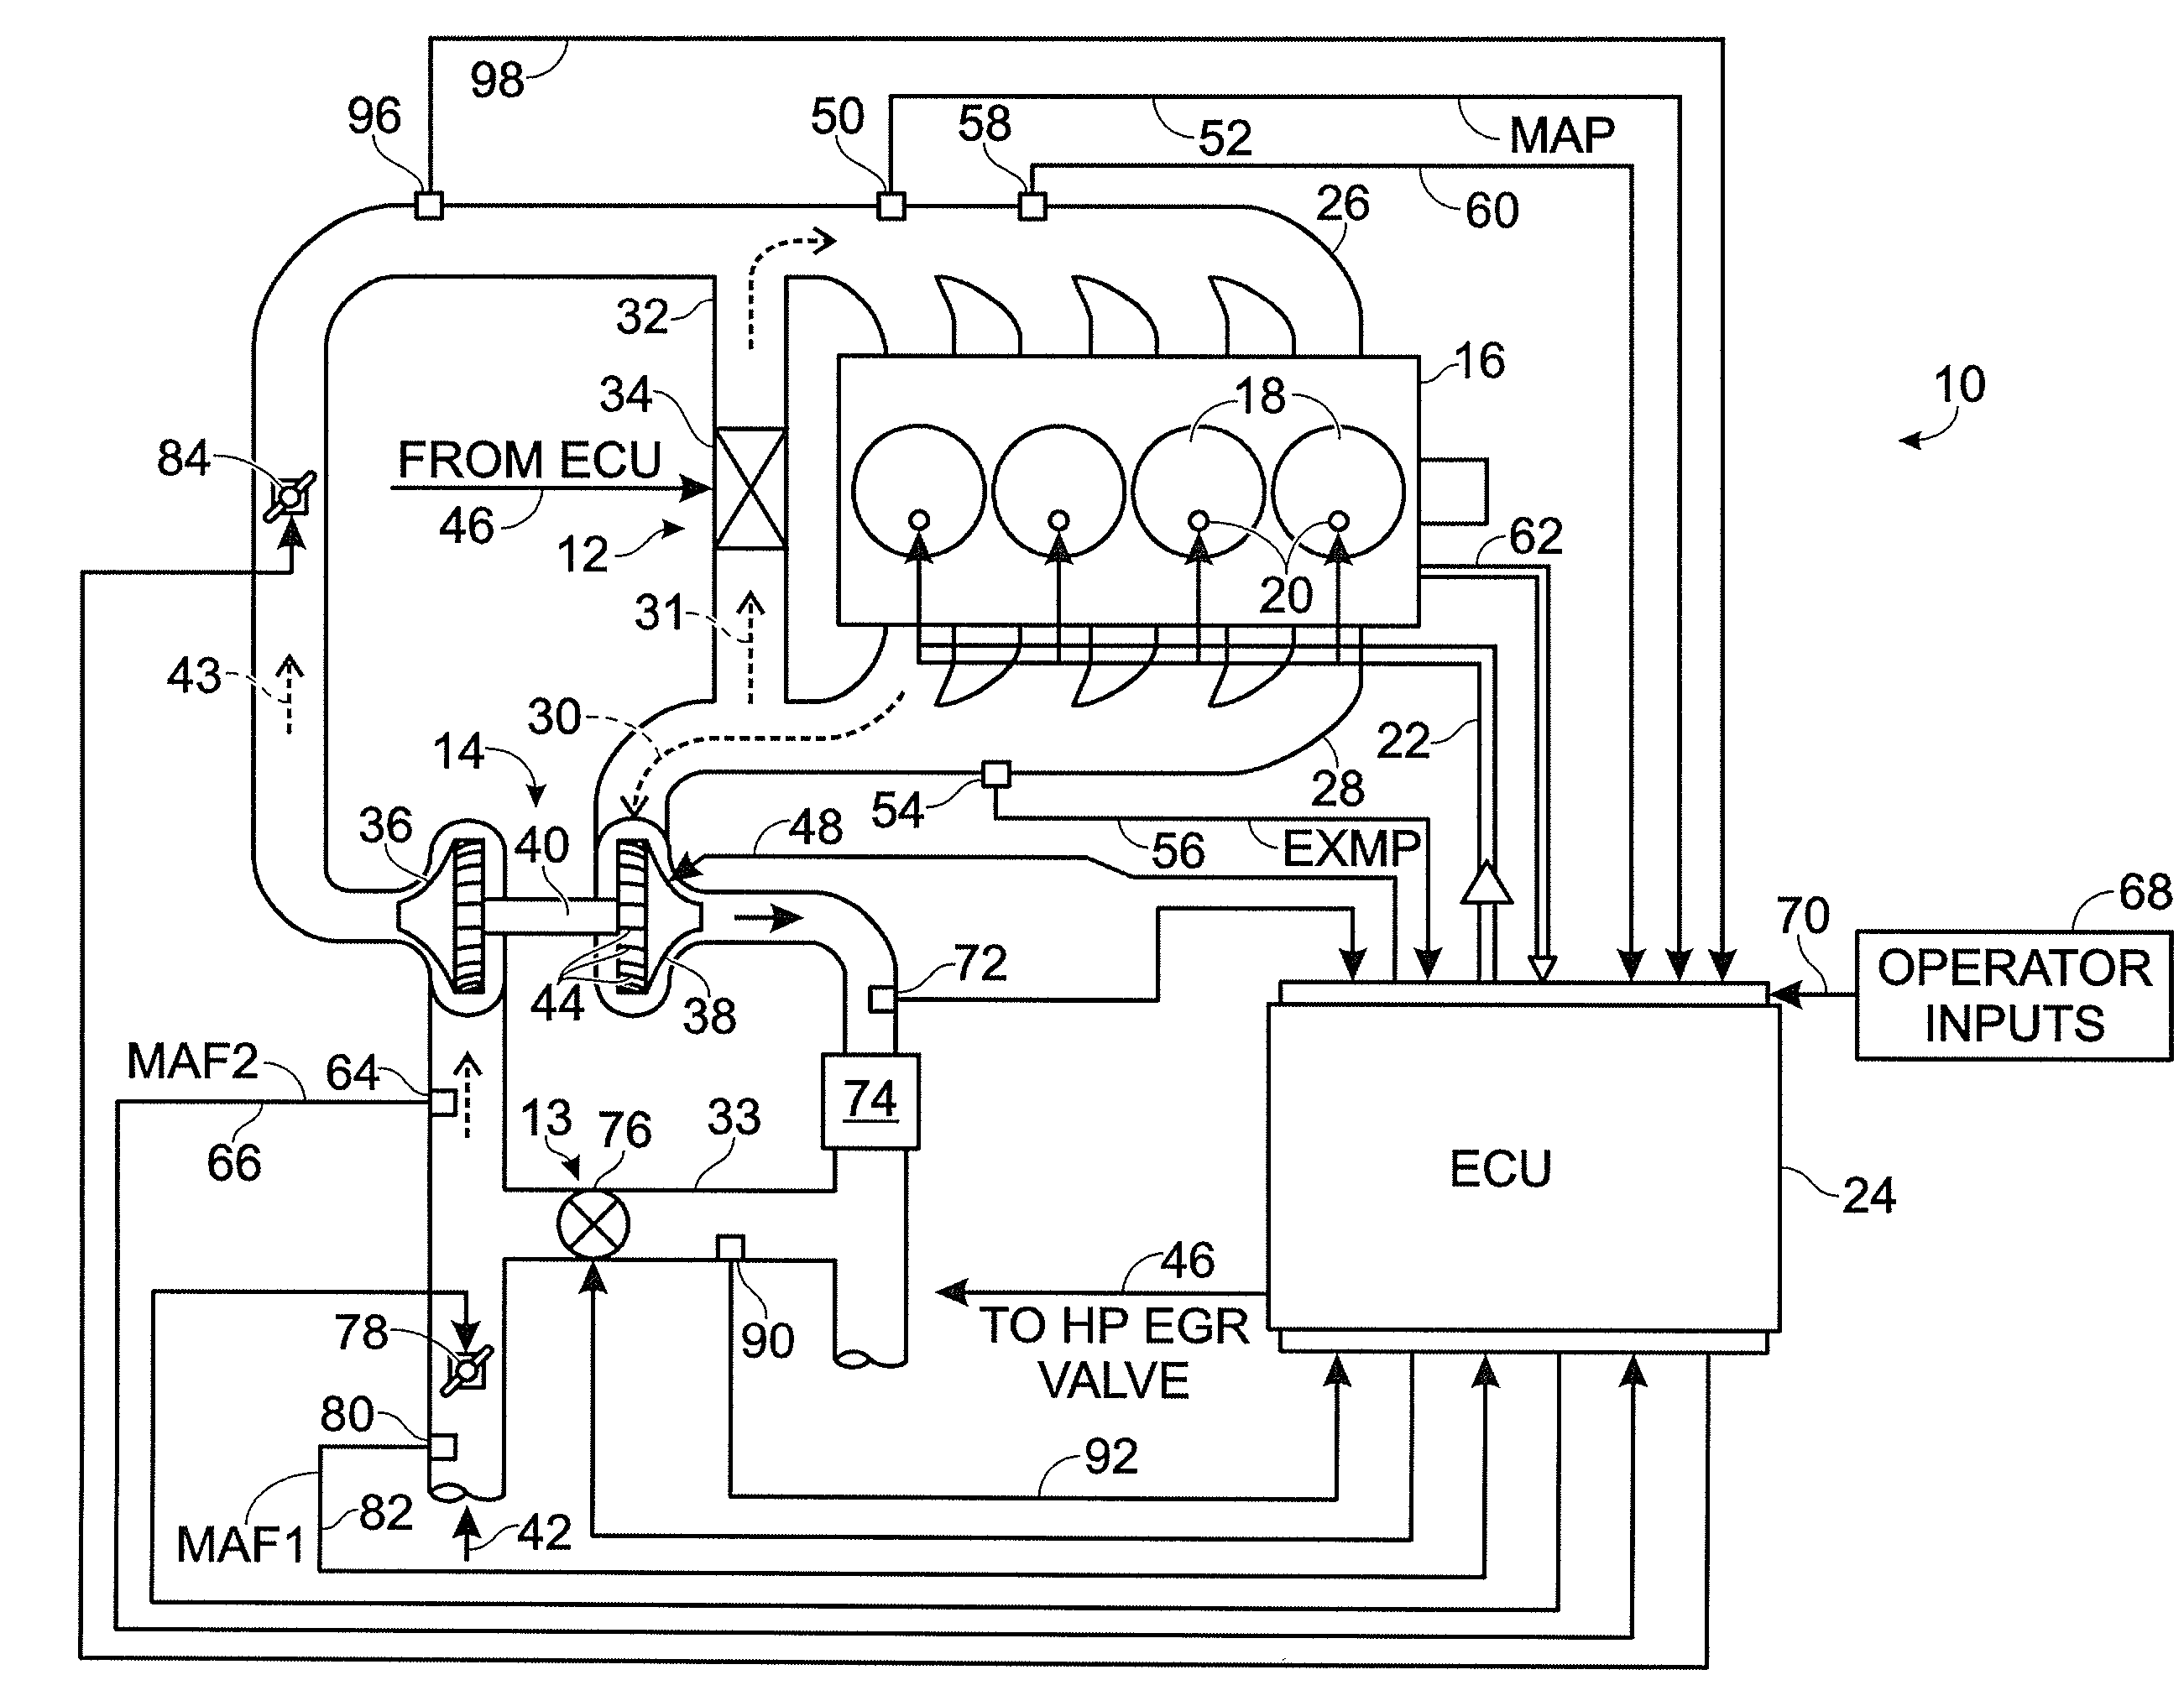 System and Method for Diagnostic of Low Pressure Exhaust Gas Recirculation System and Adapting of Measurement Devices